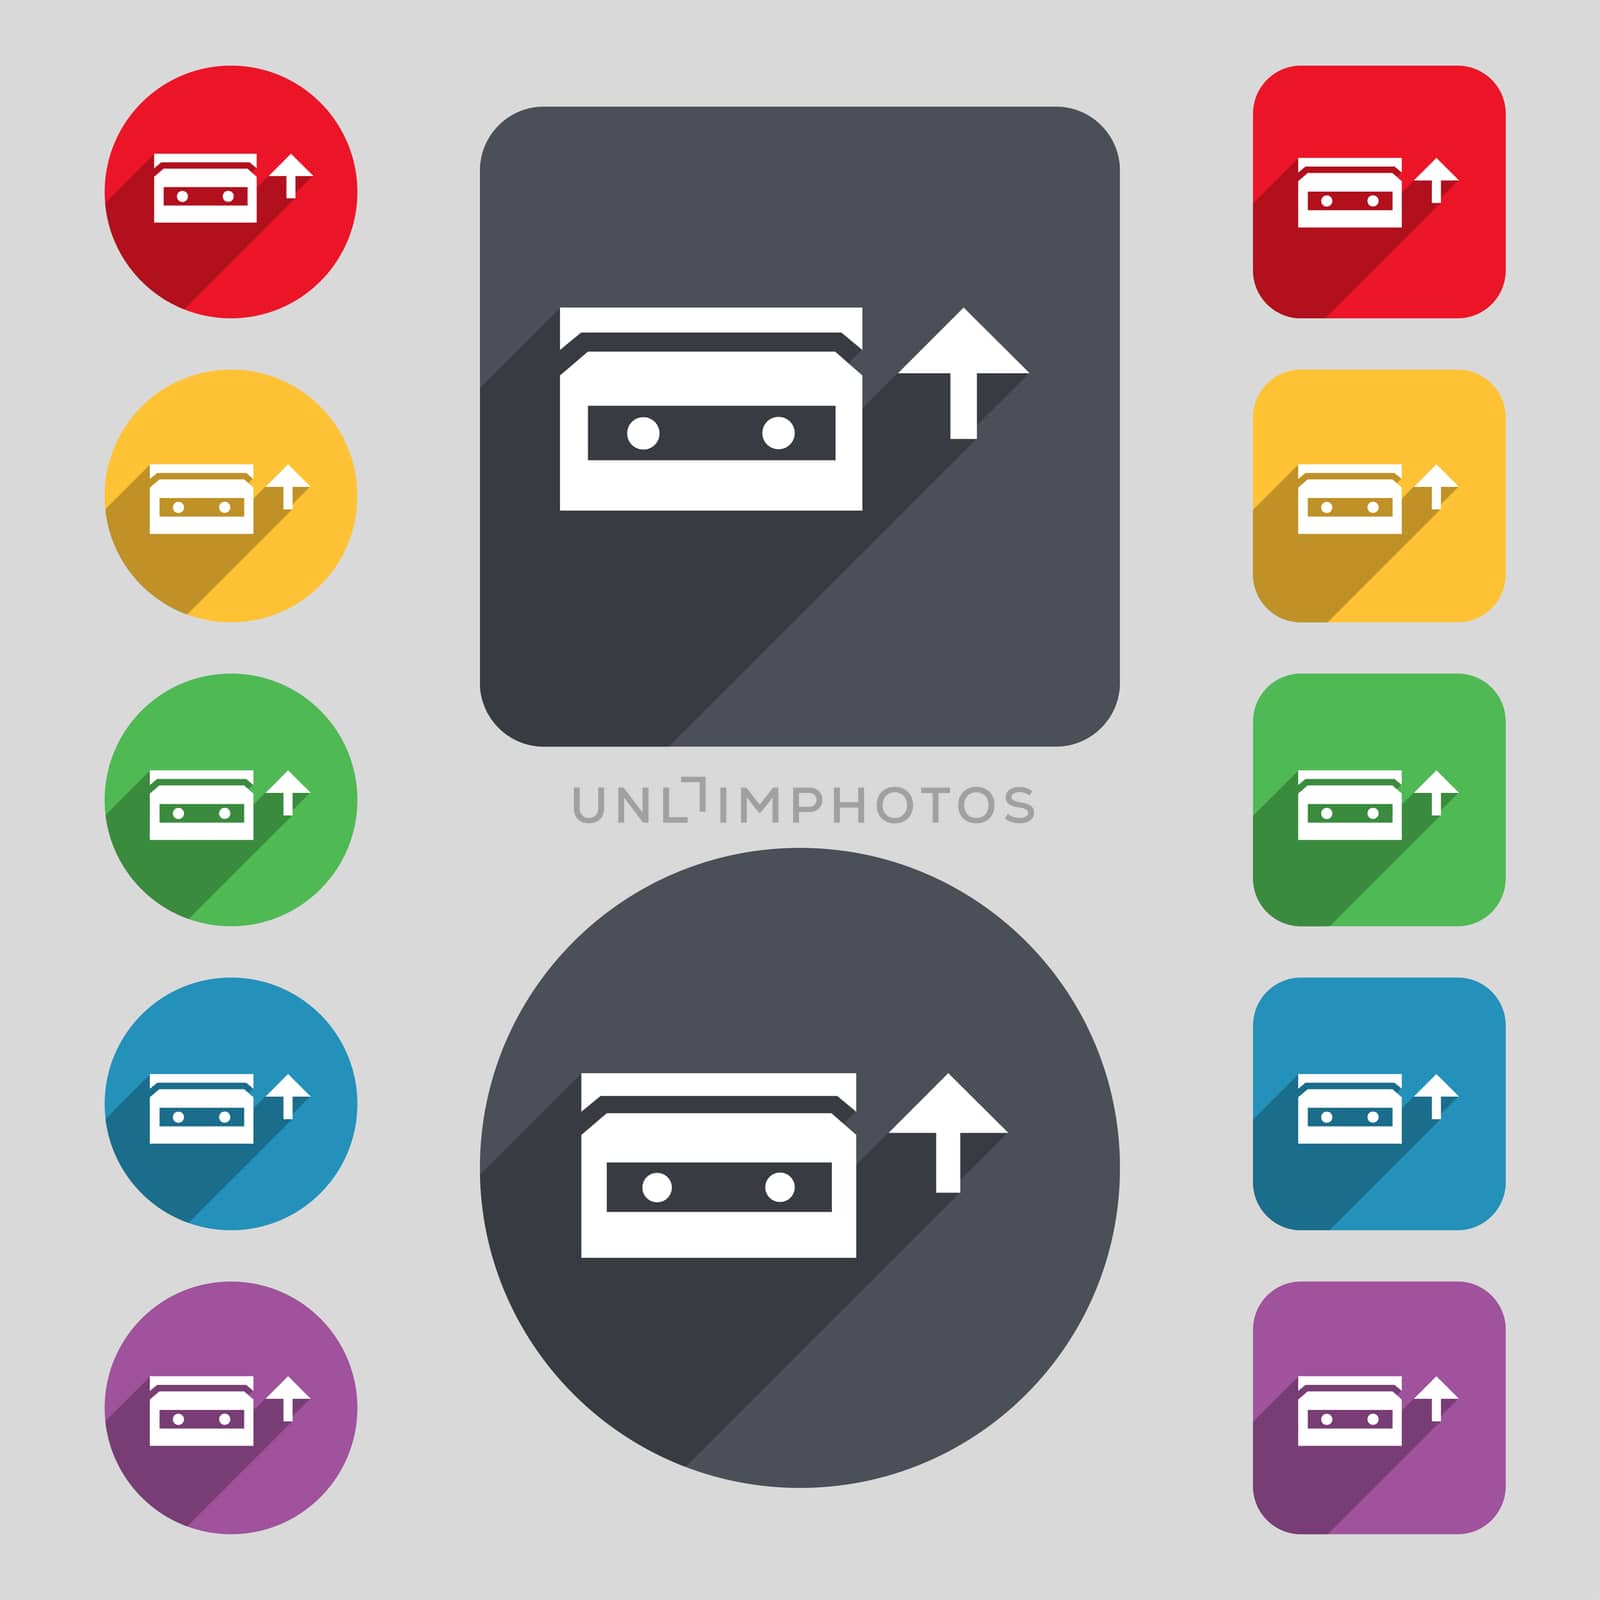 audio cassette icon sign. A set of 12 colored buttons and a long shadow. Flat design. illustration